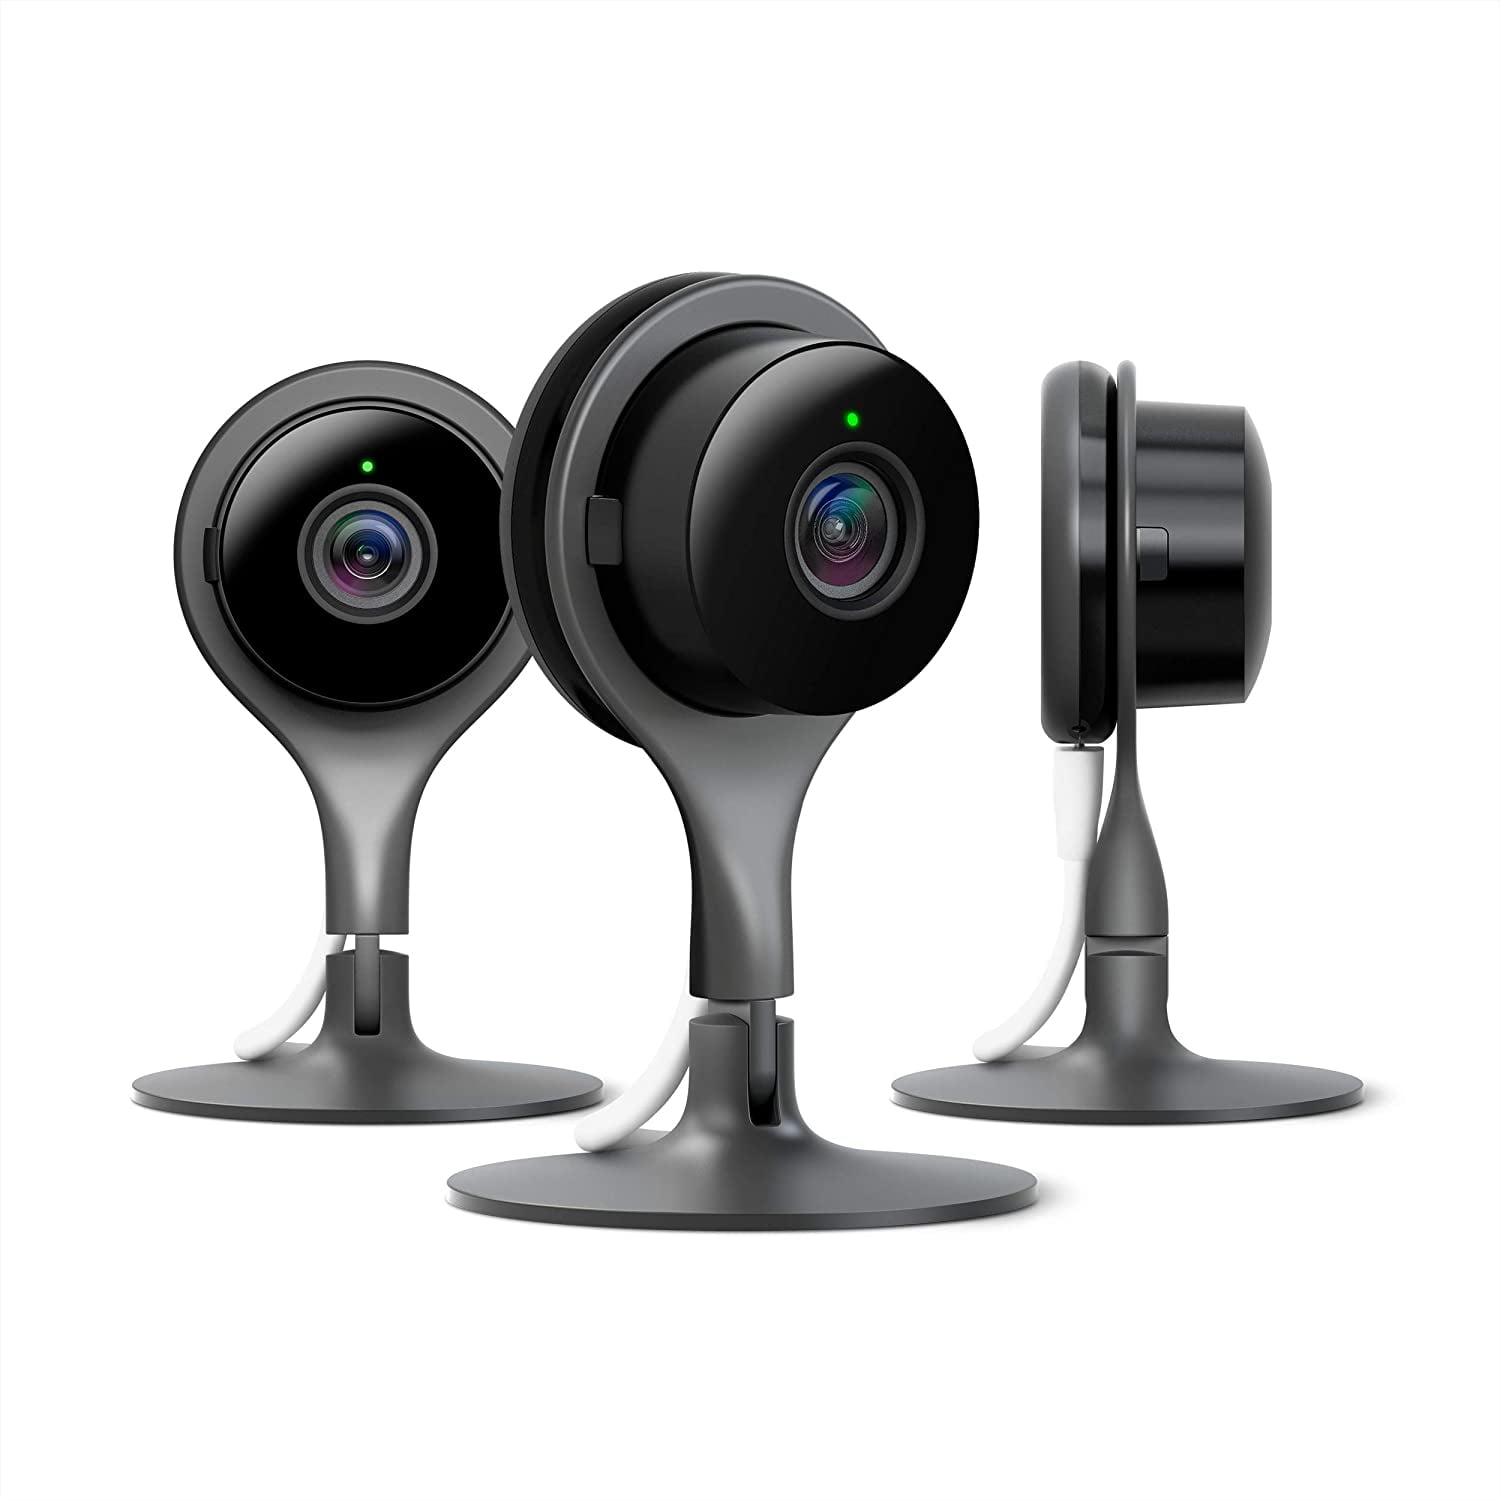 Xiaomi Smart Camera C400 guide - Apps on Google Play